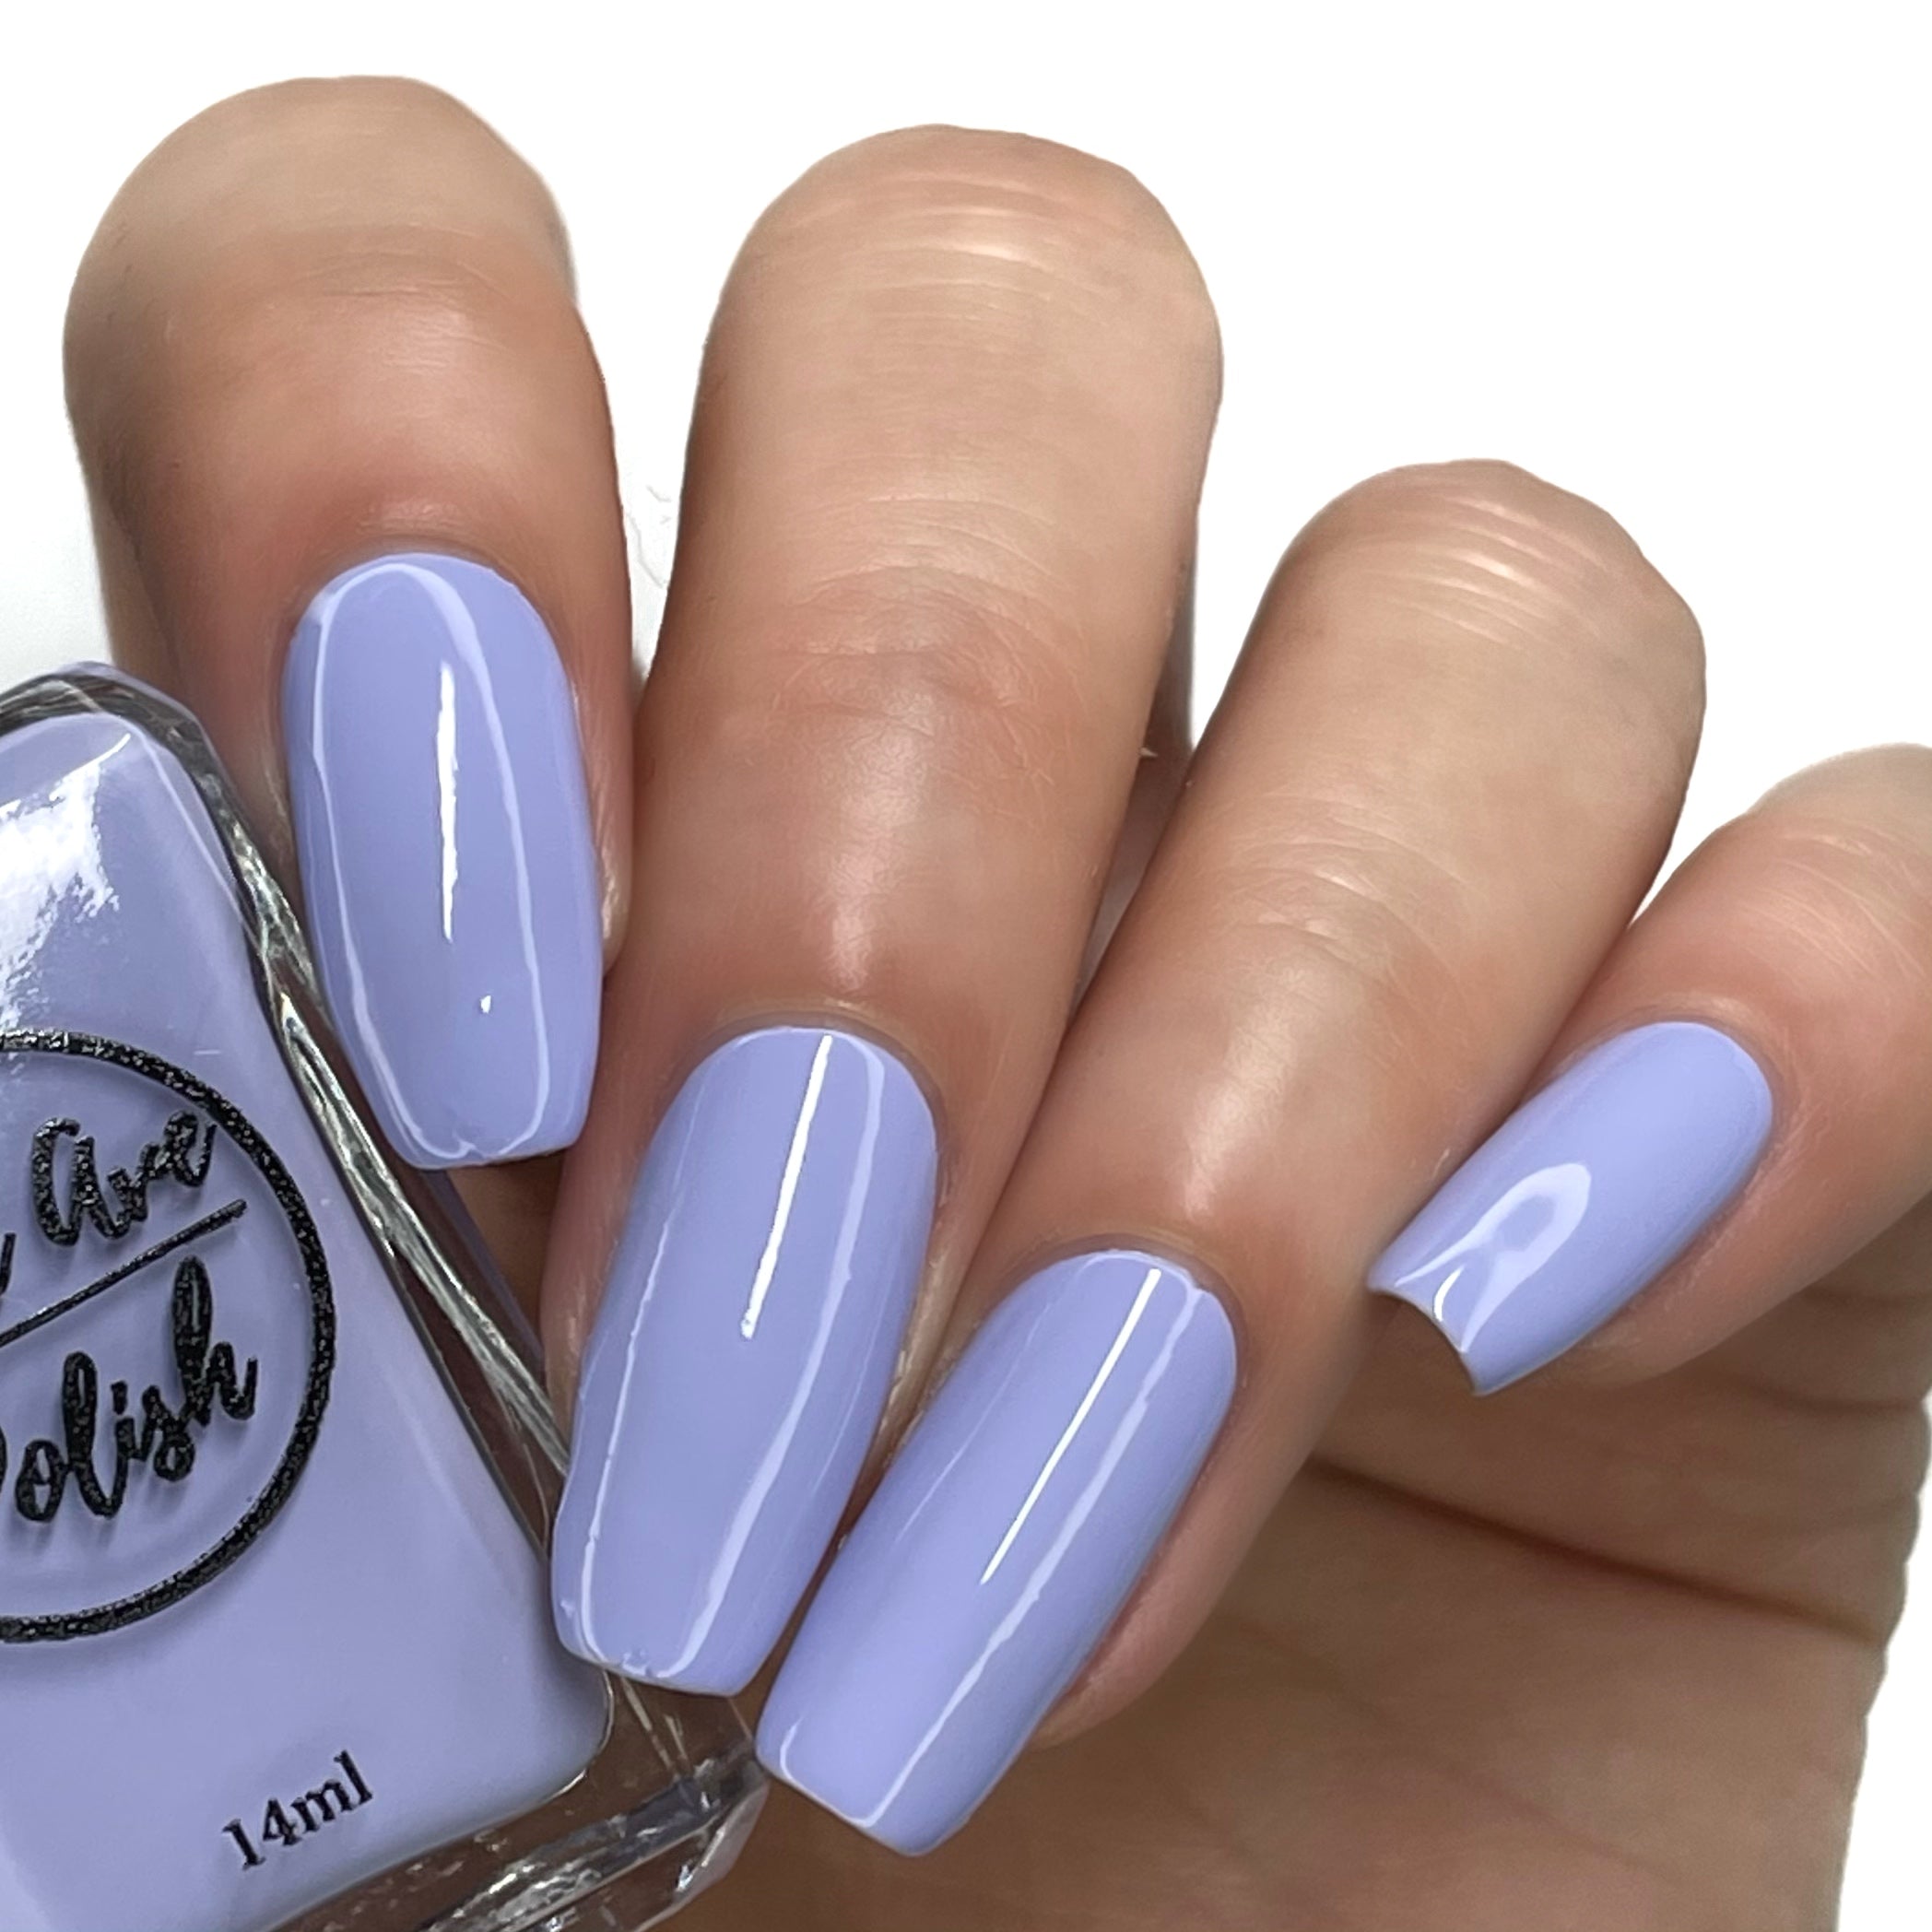 Lavender Nail Ideas to Try For Spring and Summer | POPSUGAR Beauty